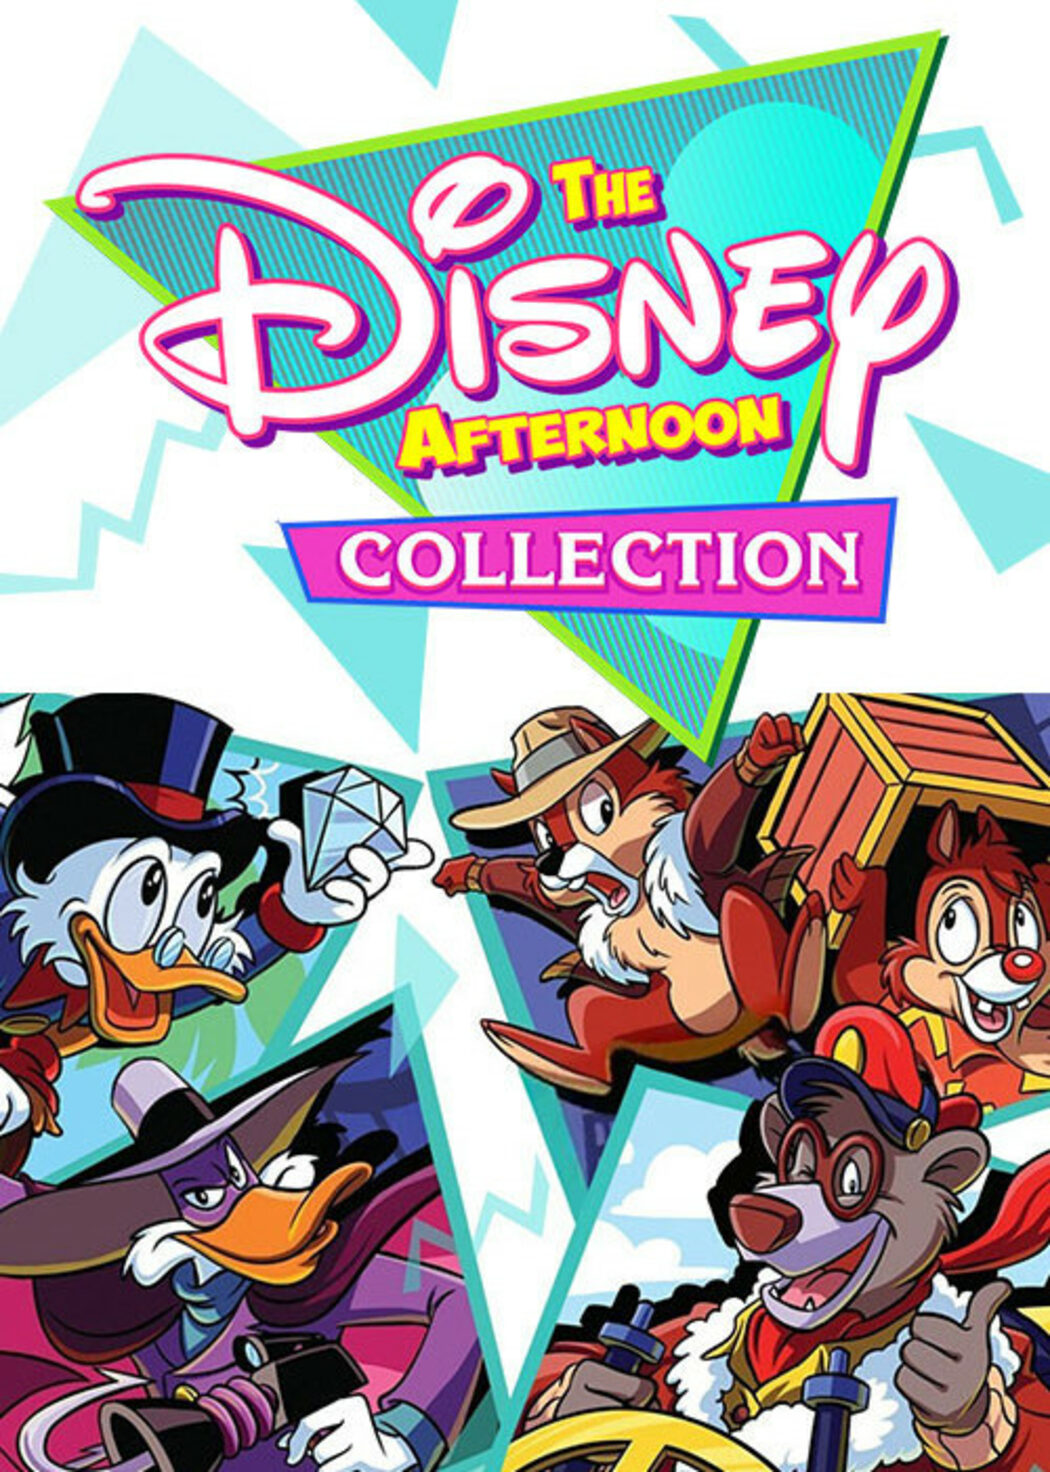 Disney afternoon collection steam фото 3